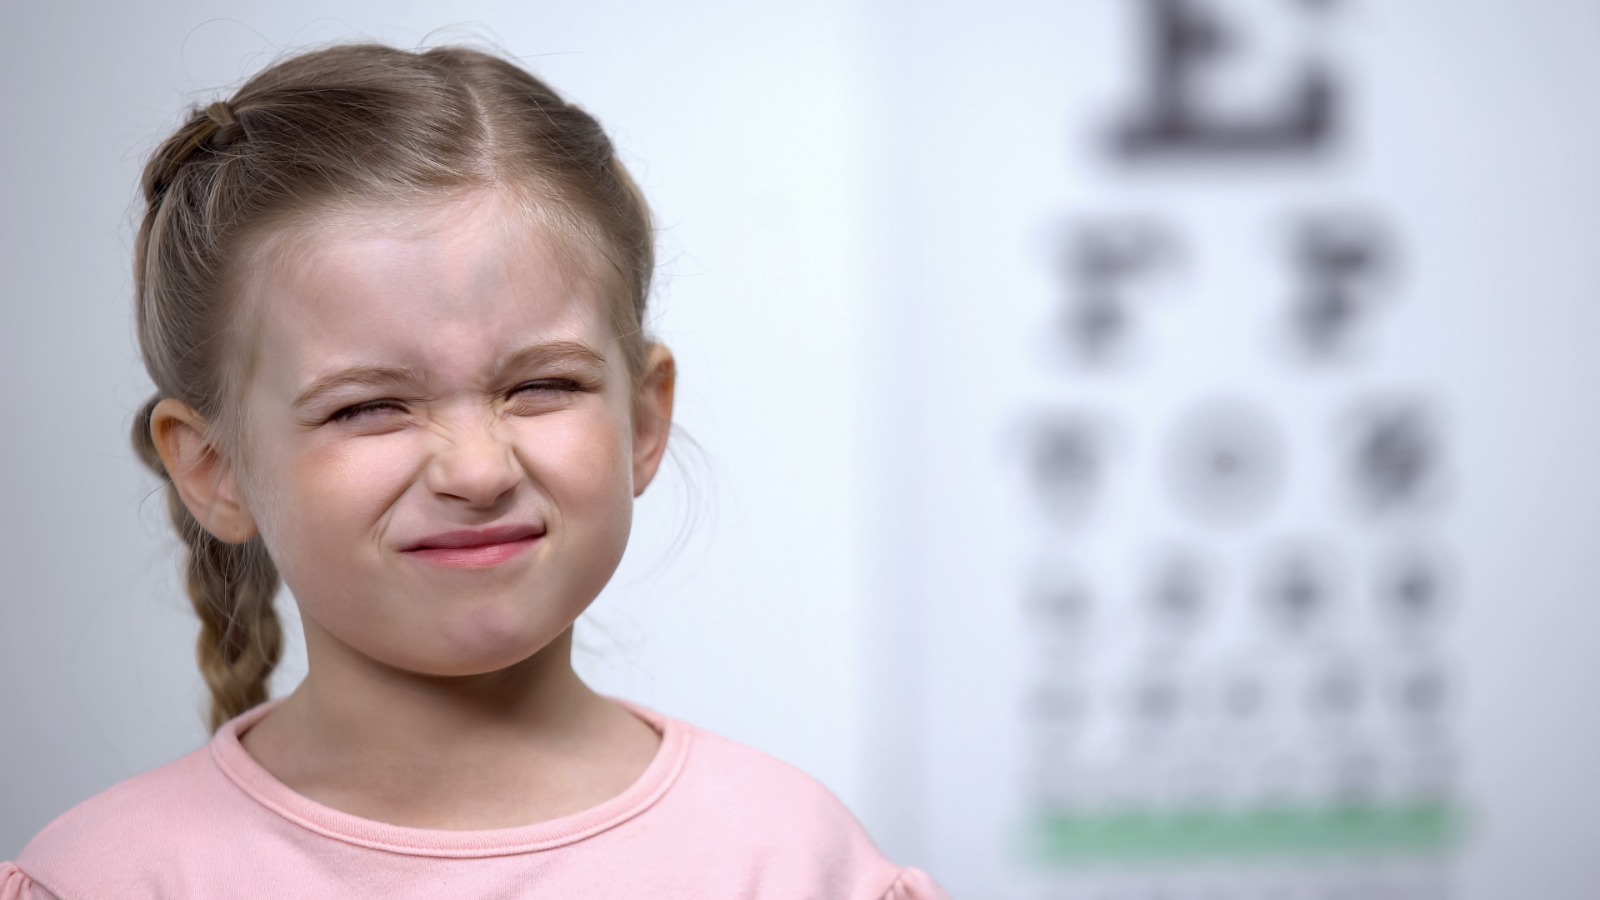 Myopia myths and treatments for short sightedness